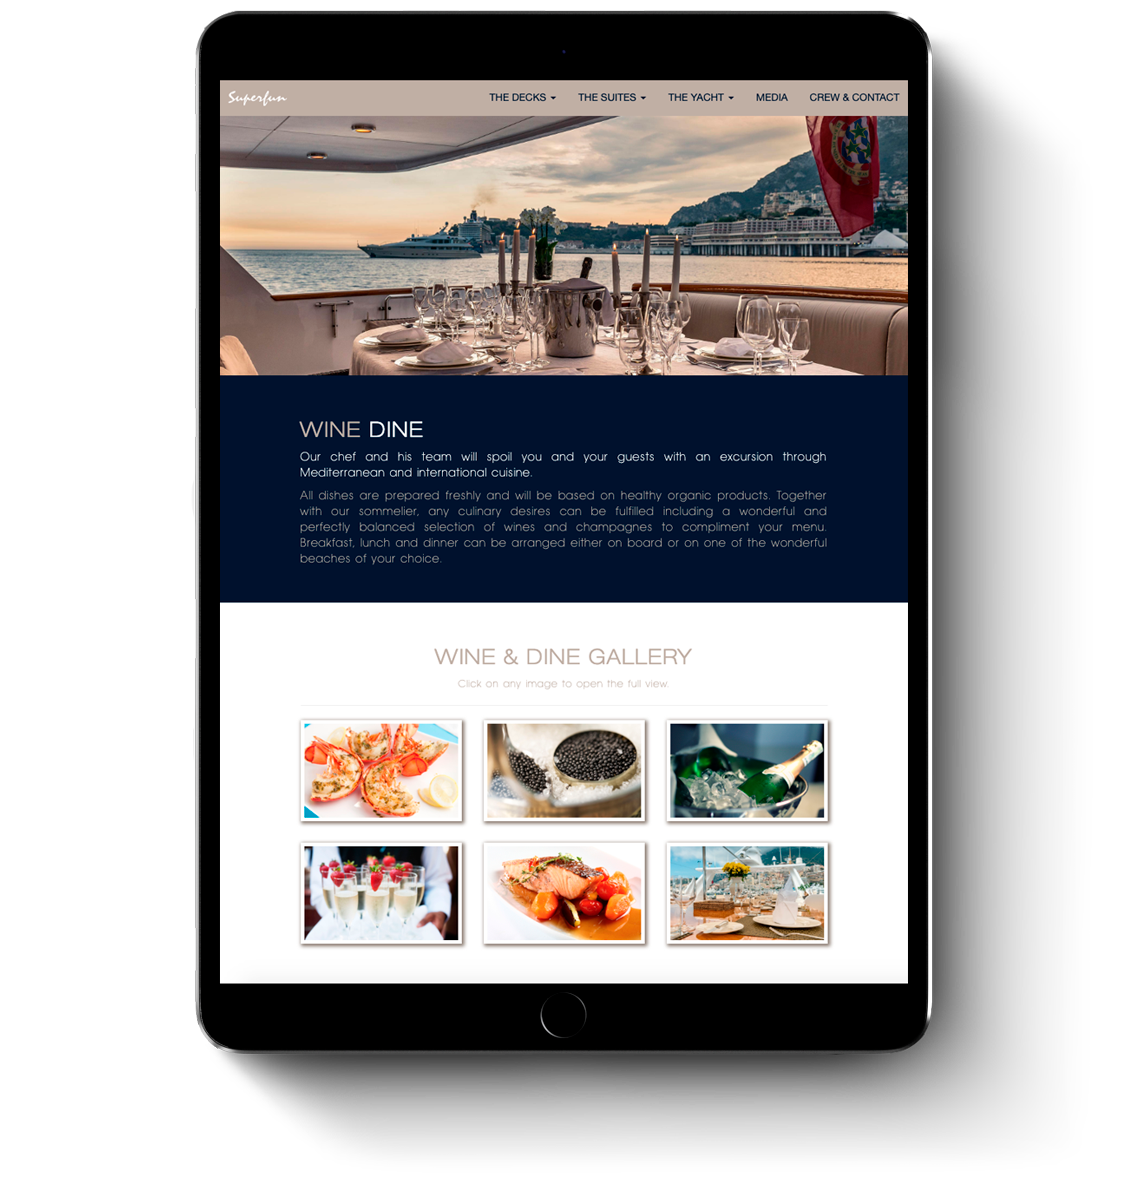 Web design for mobile devices and tablets of Superfun super yacht